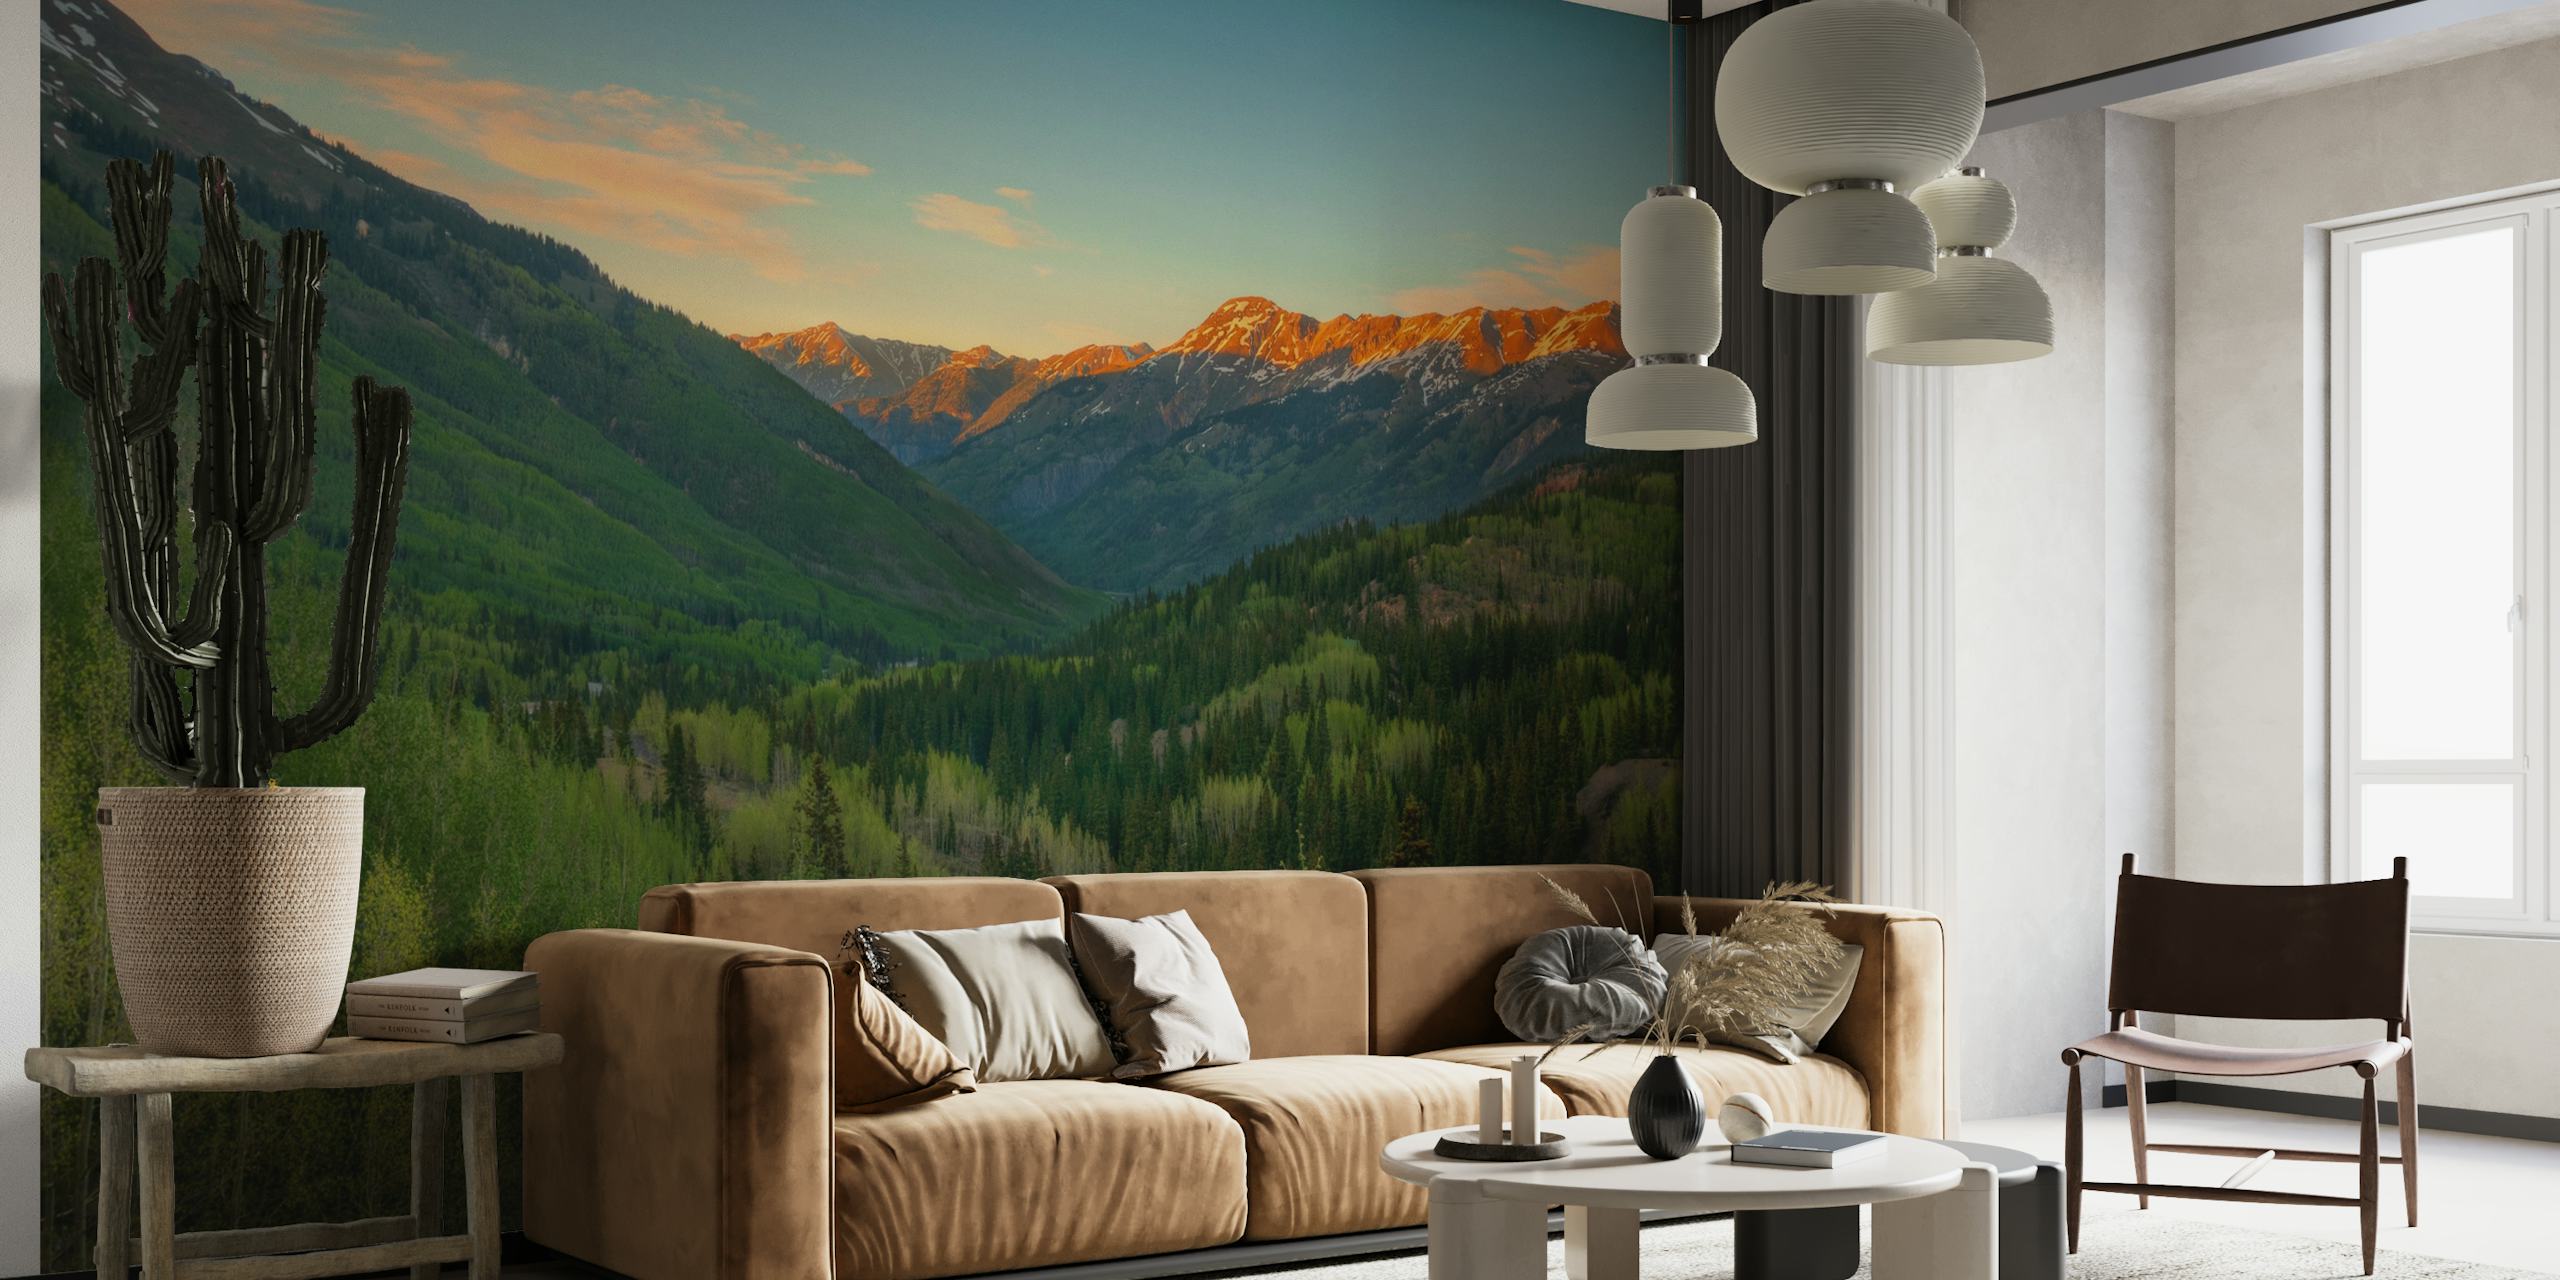 Panoramic mountain landscape wall mural with sunset hues